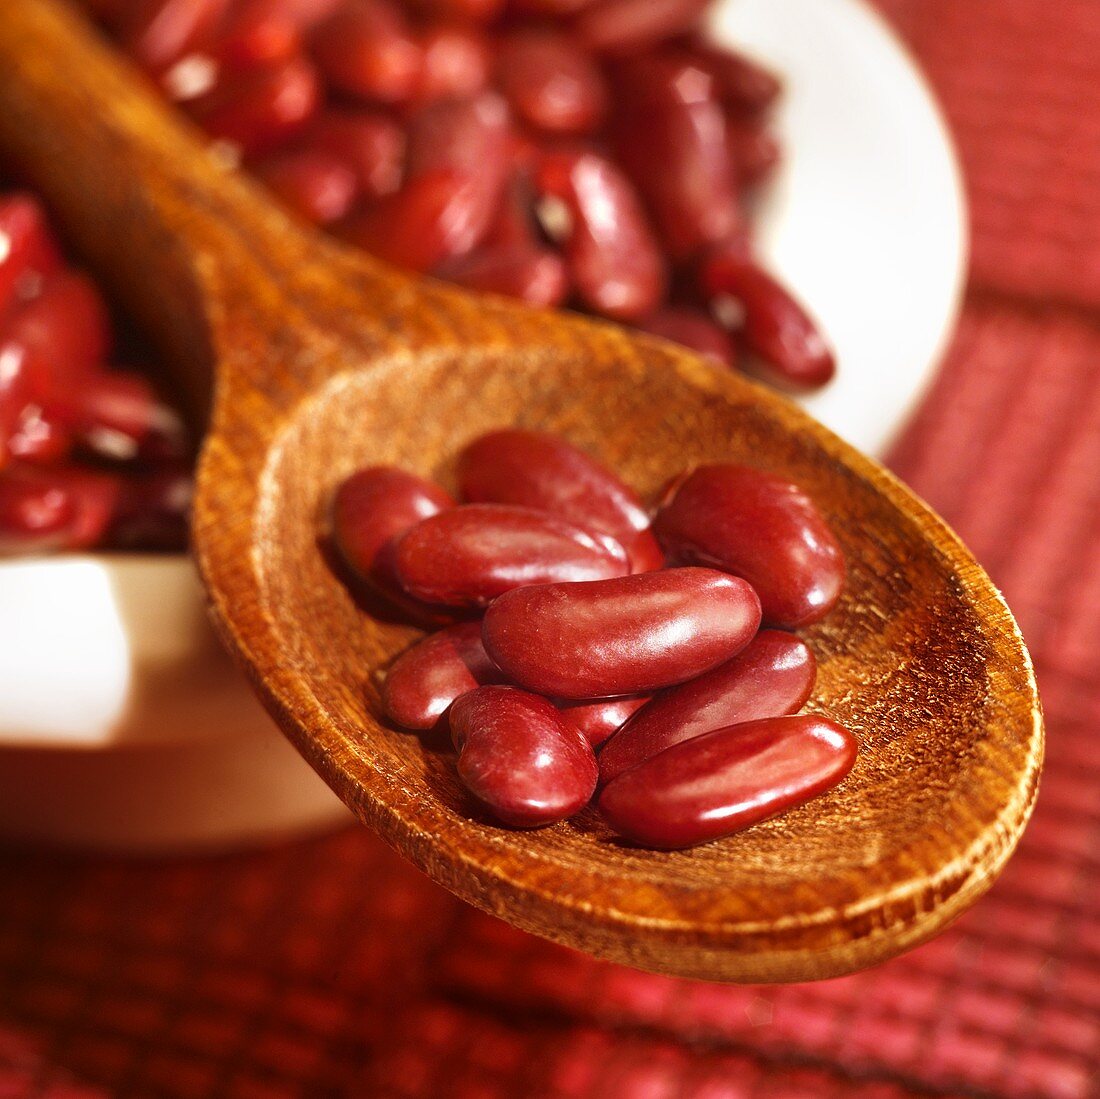 Red kidney beans on a wooden spoon